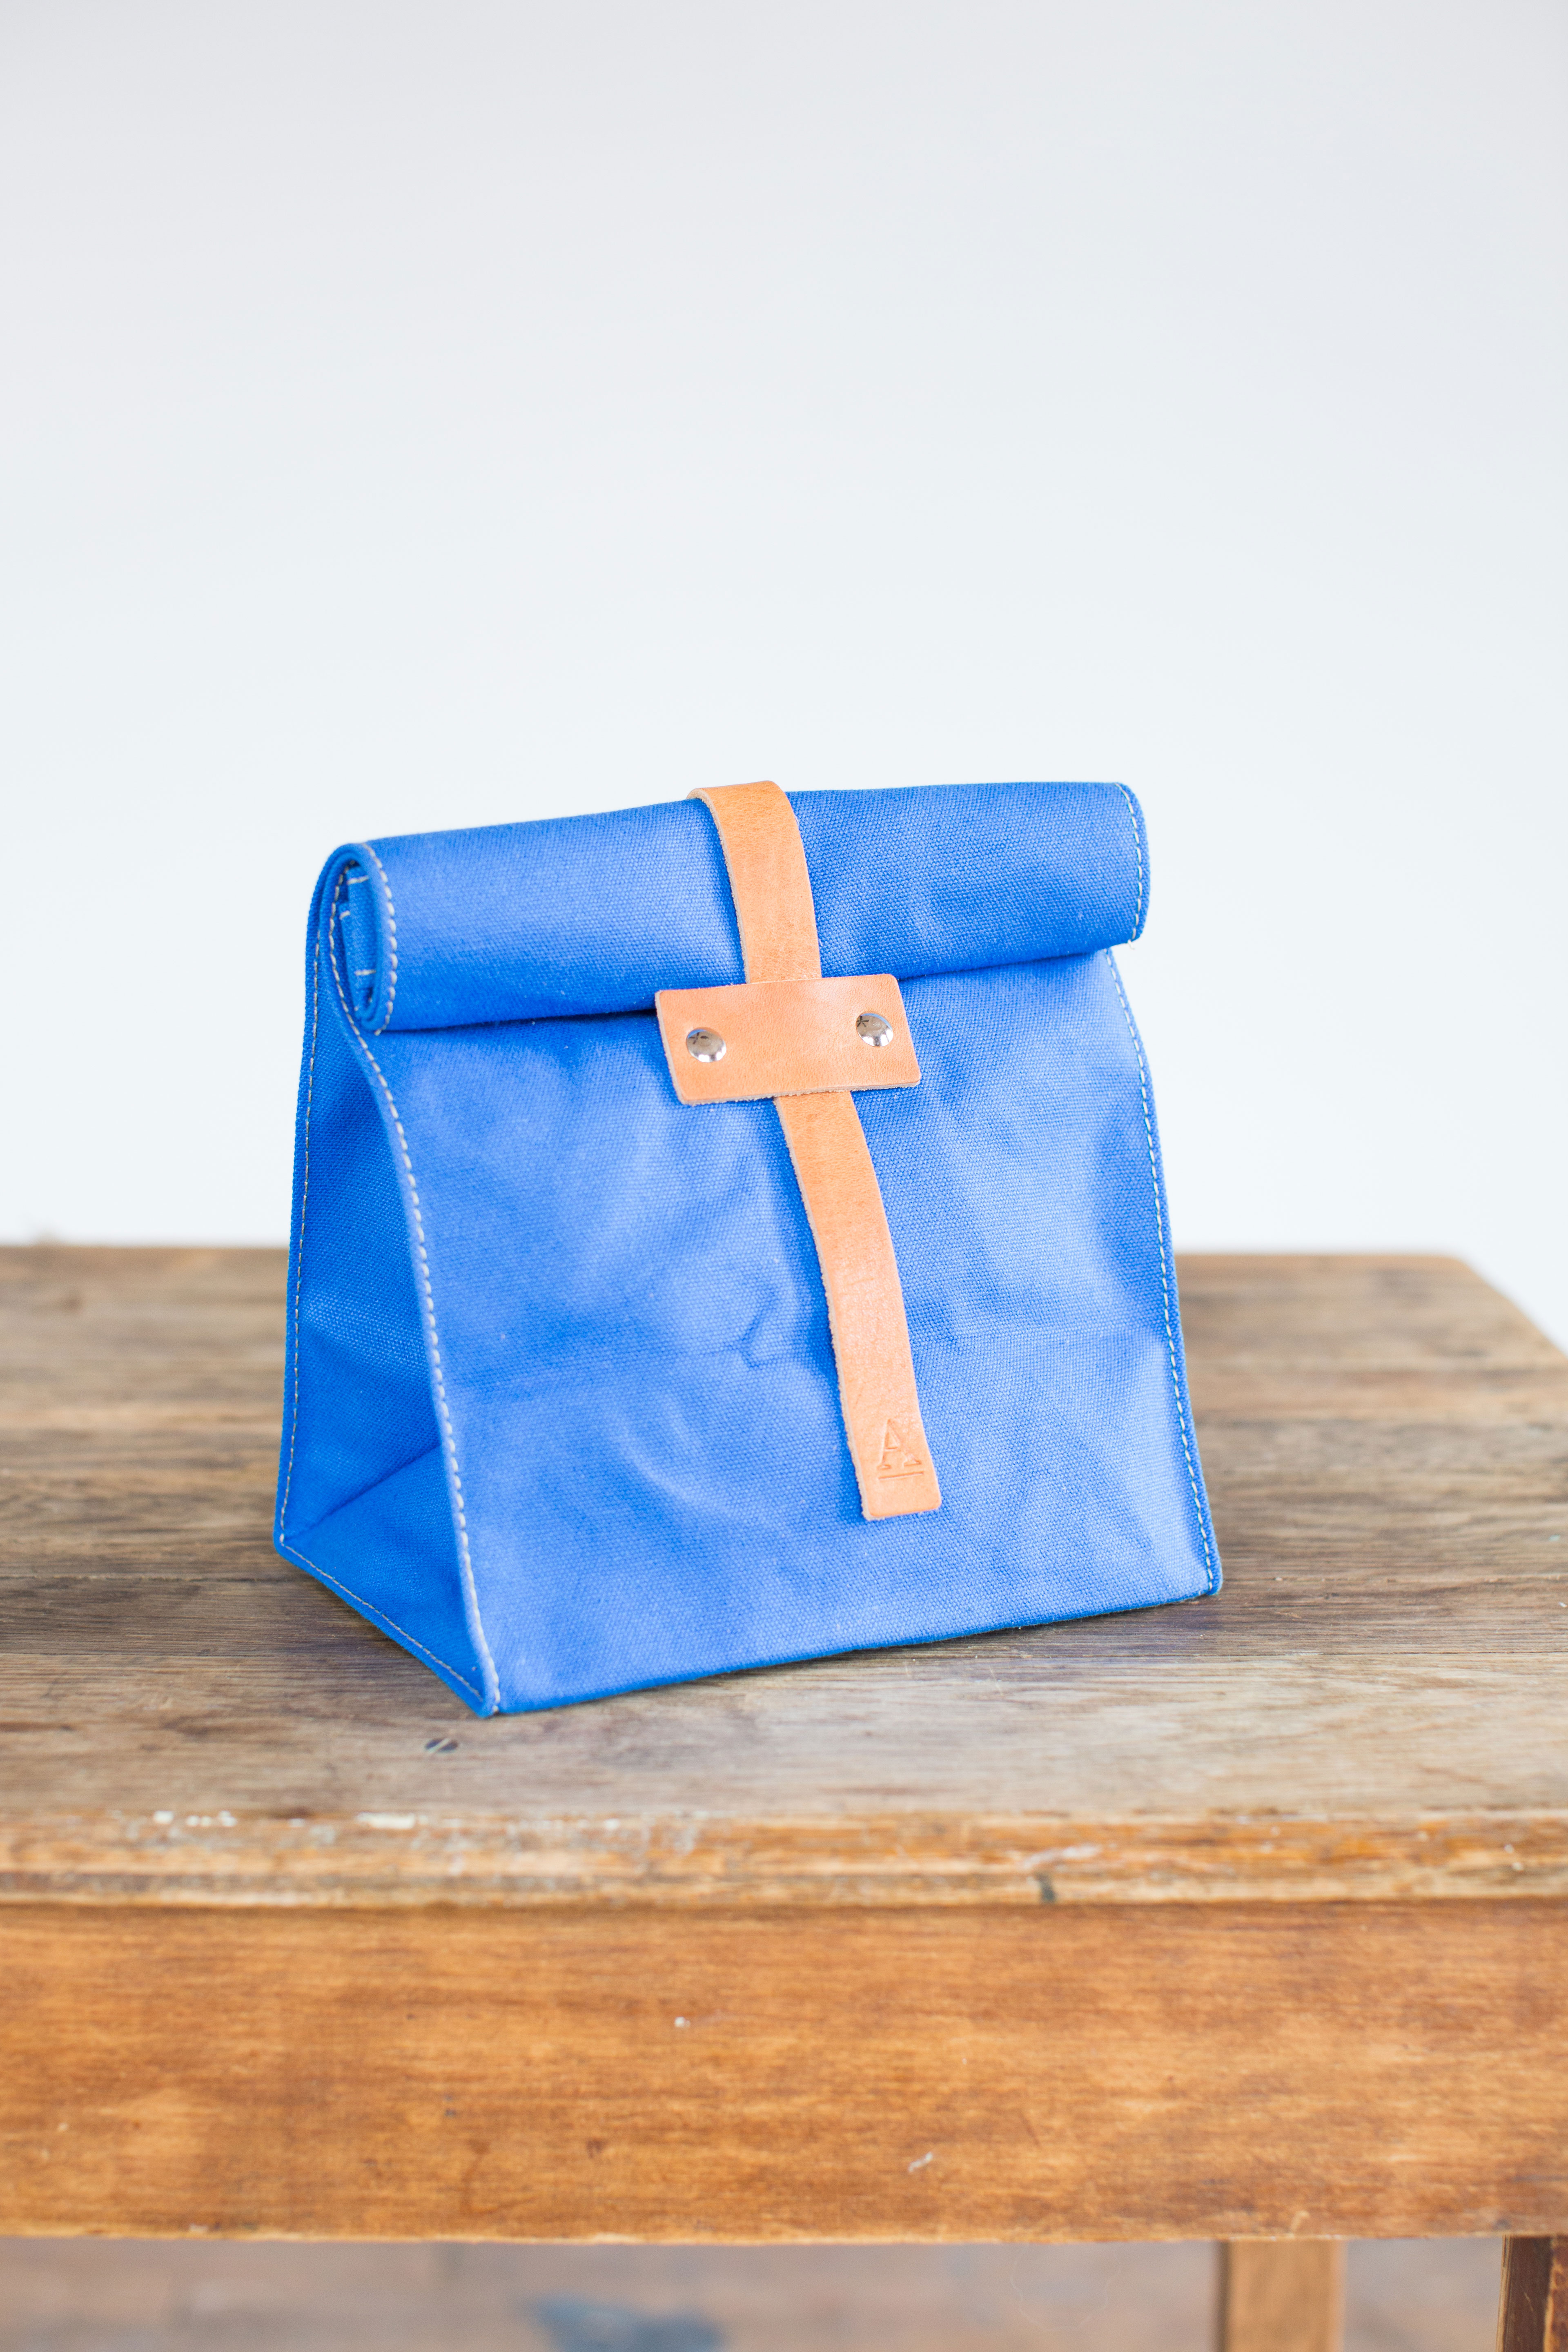 10 Stylish Lunch Bags